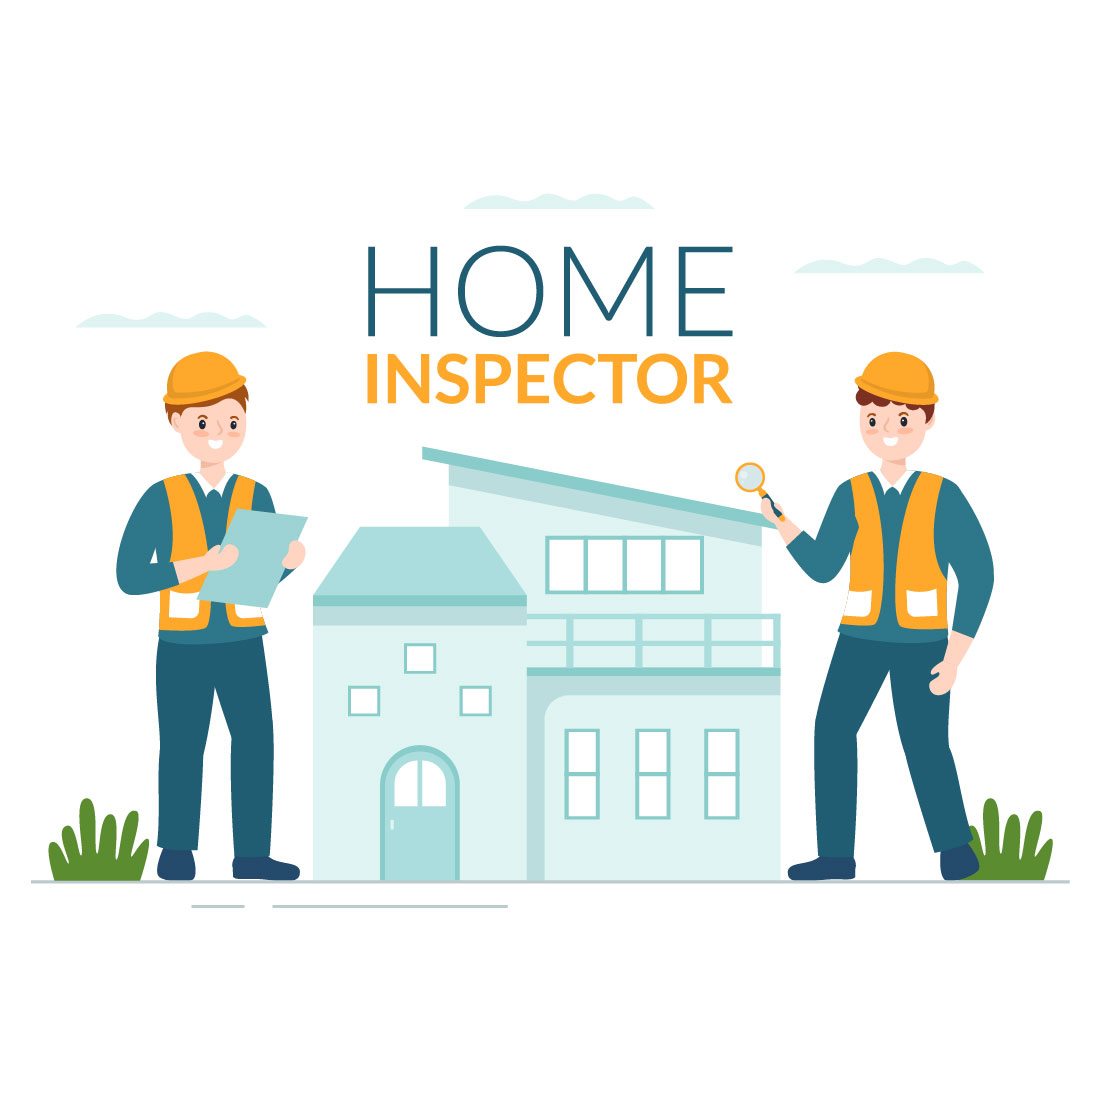 Home Inspector Graphics Cartoon Illustration cover image.